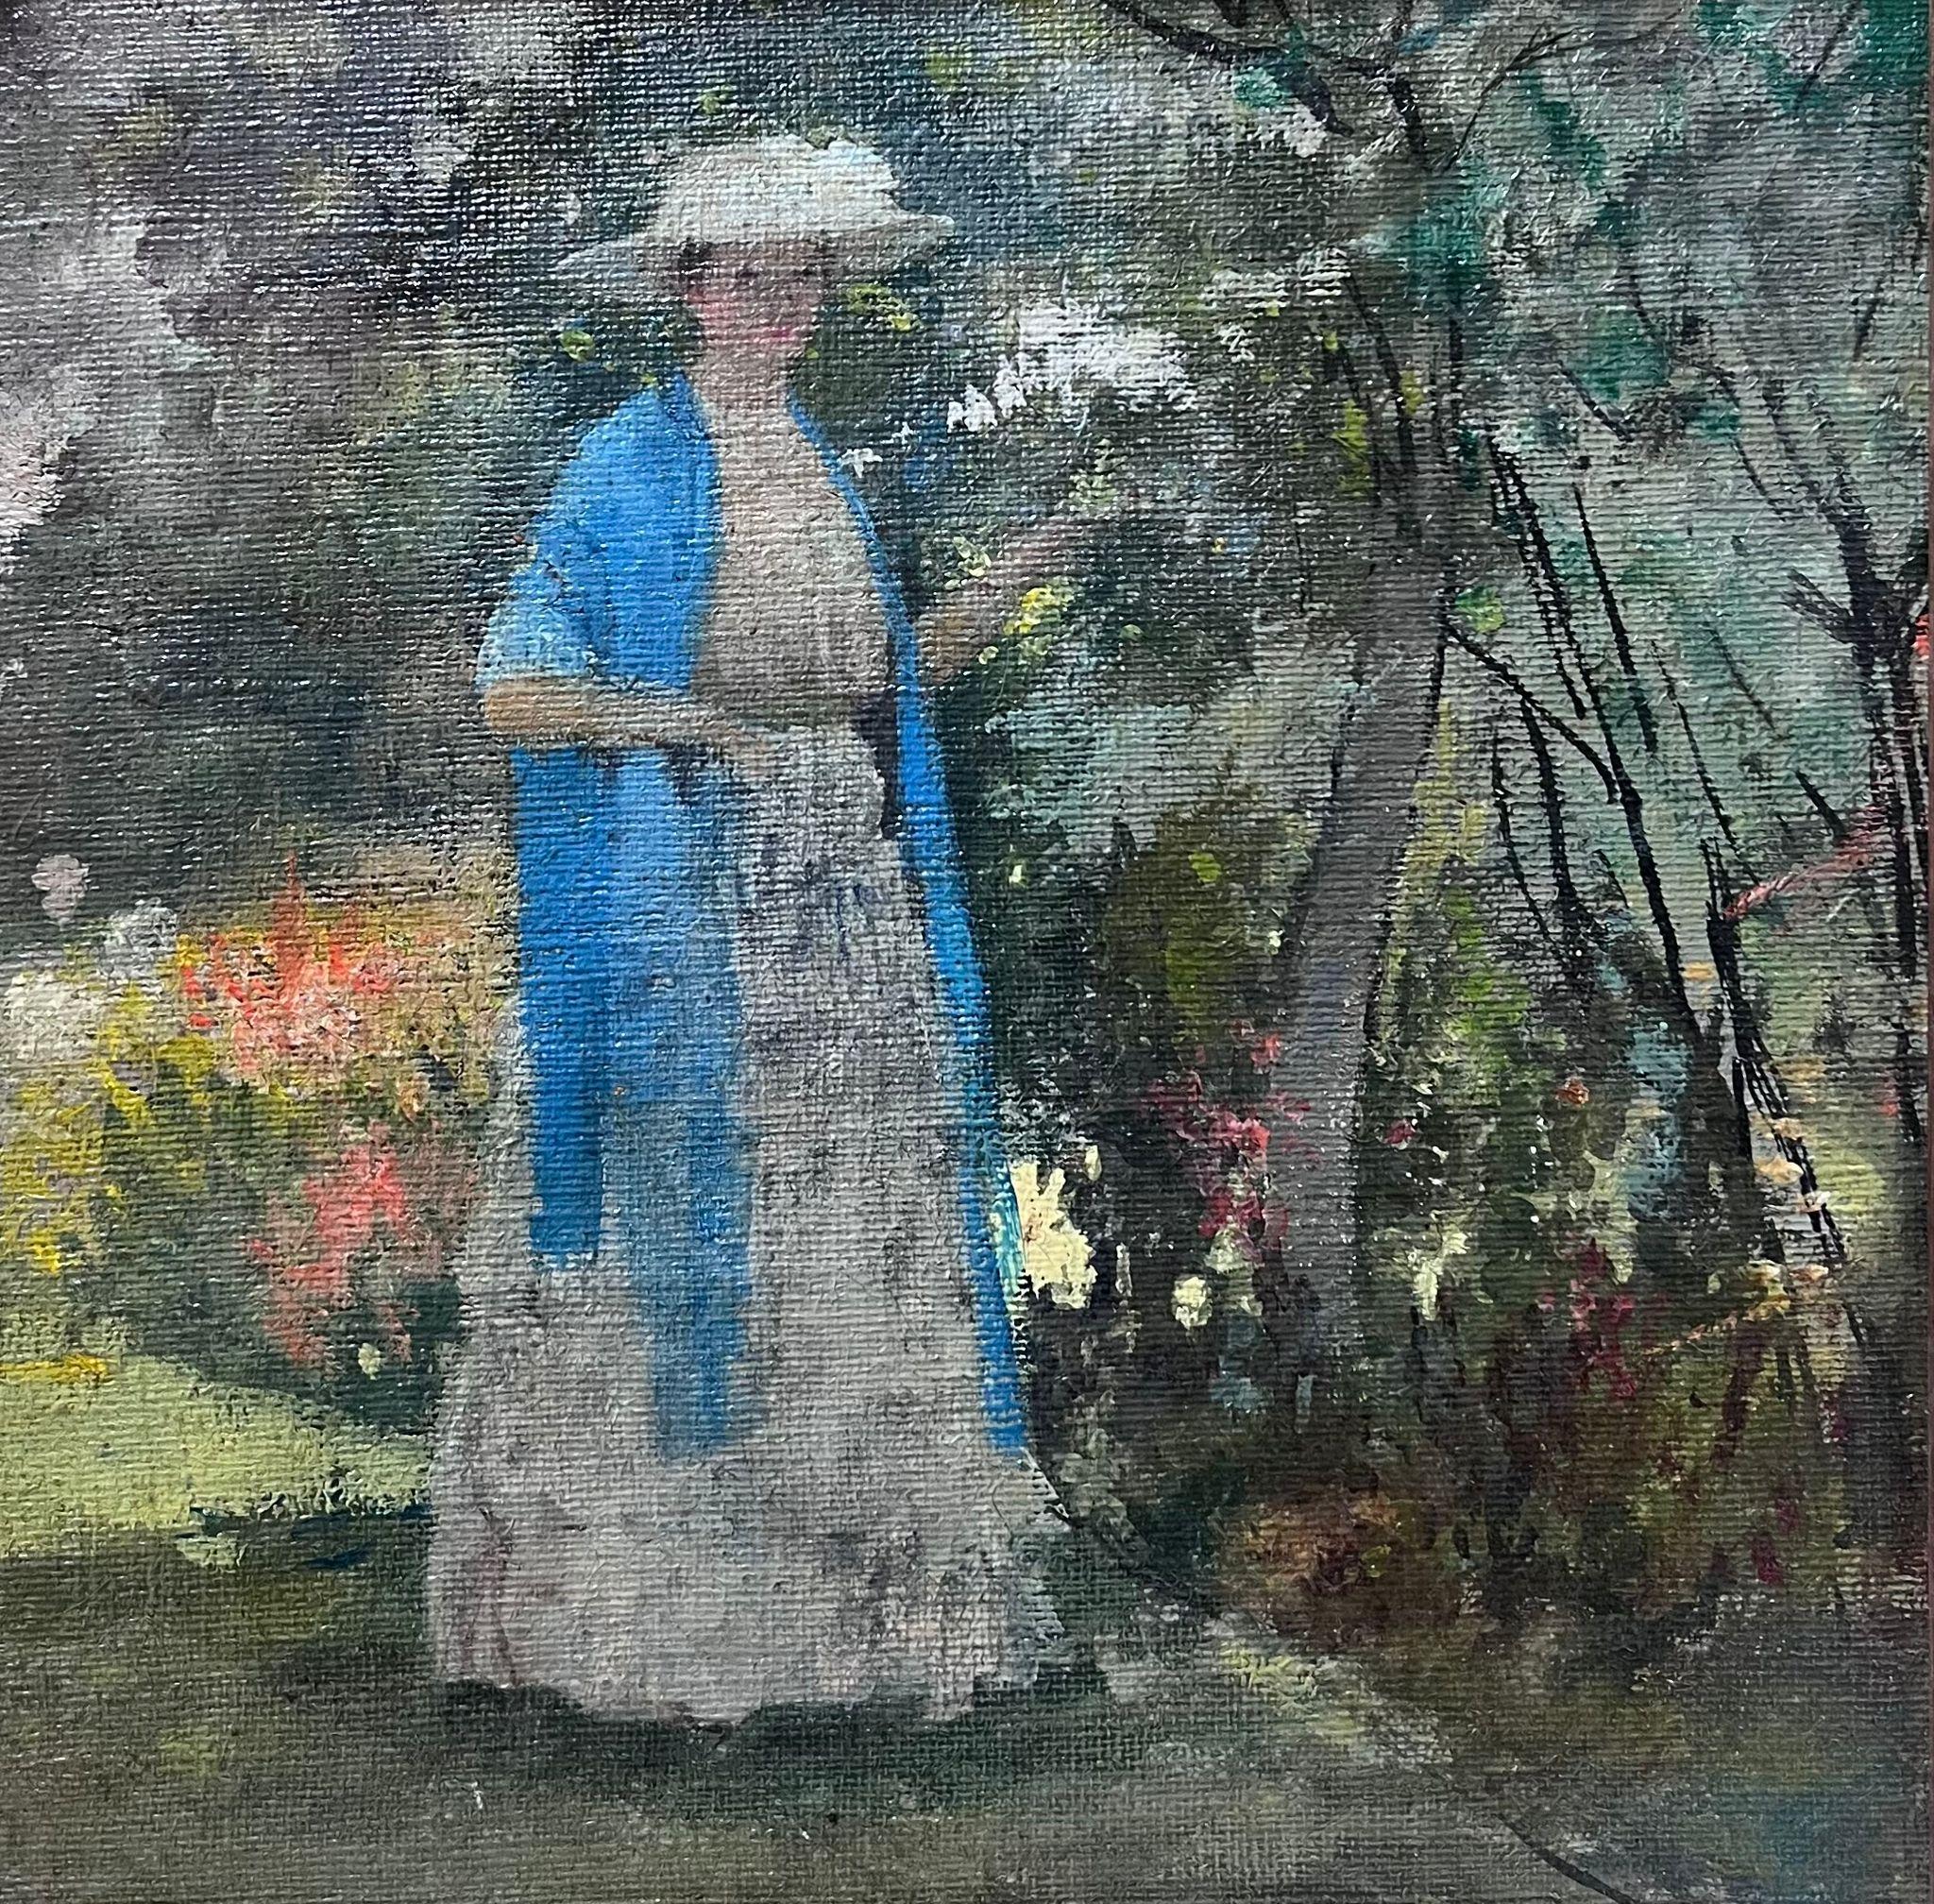 French School  Figurative Painting - Nabis School Early 1900s French Oil Painting Lady in Blue Scarf in Floral Garden